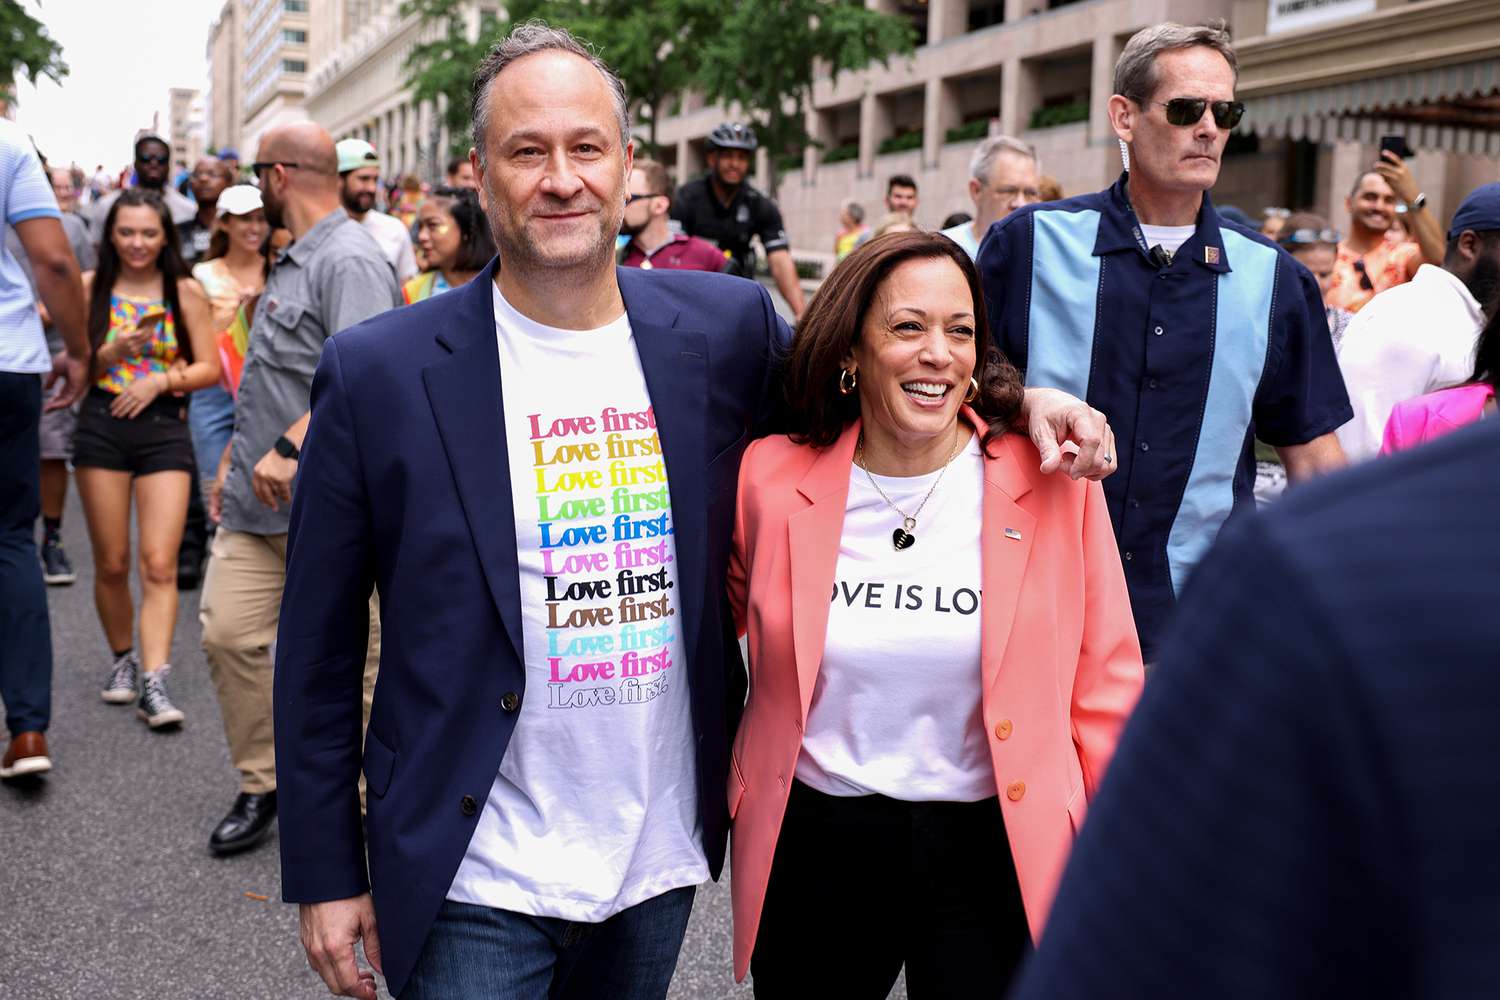 Kamala Harris Becomes First Sitting VP to March in a Pride Event | PEOPLE.com